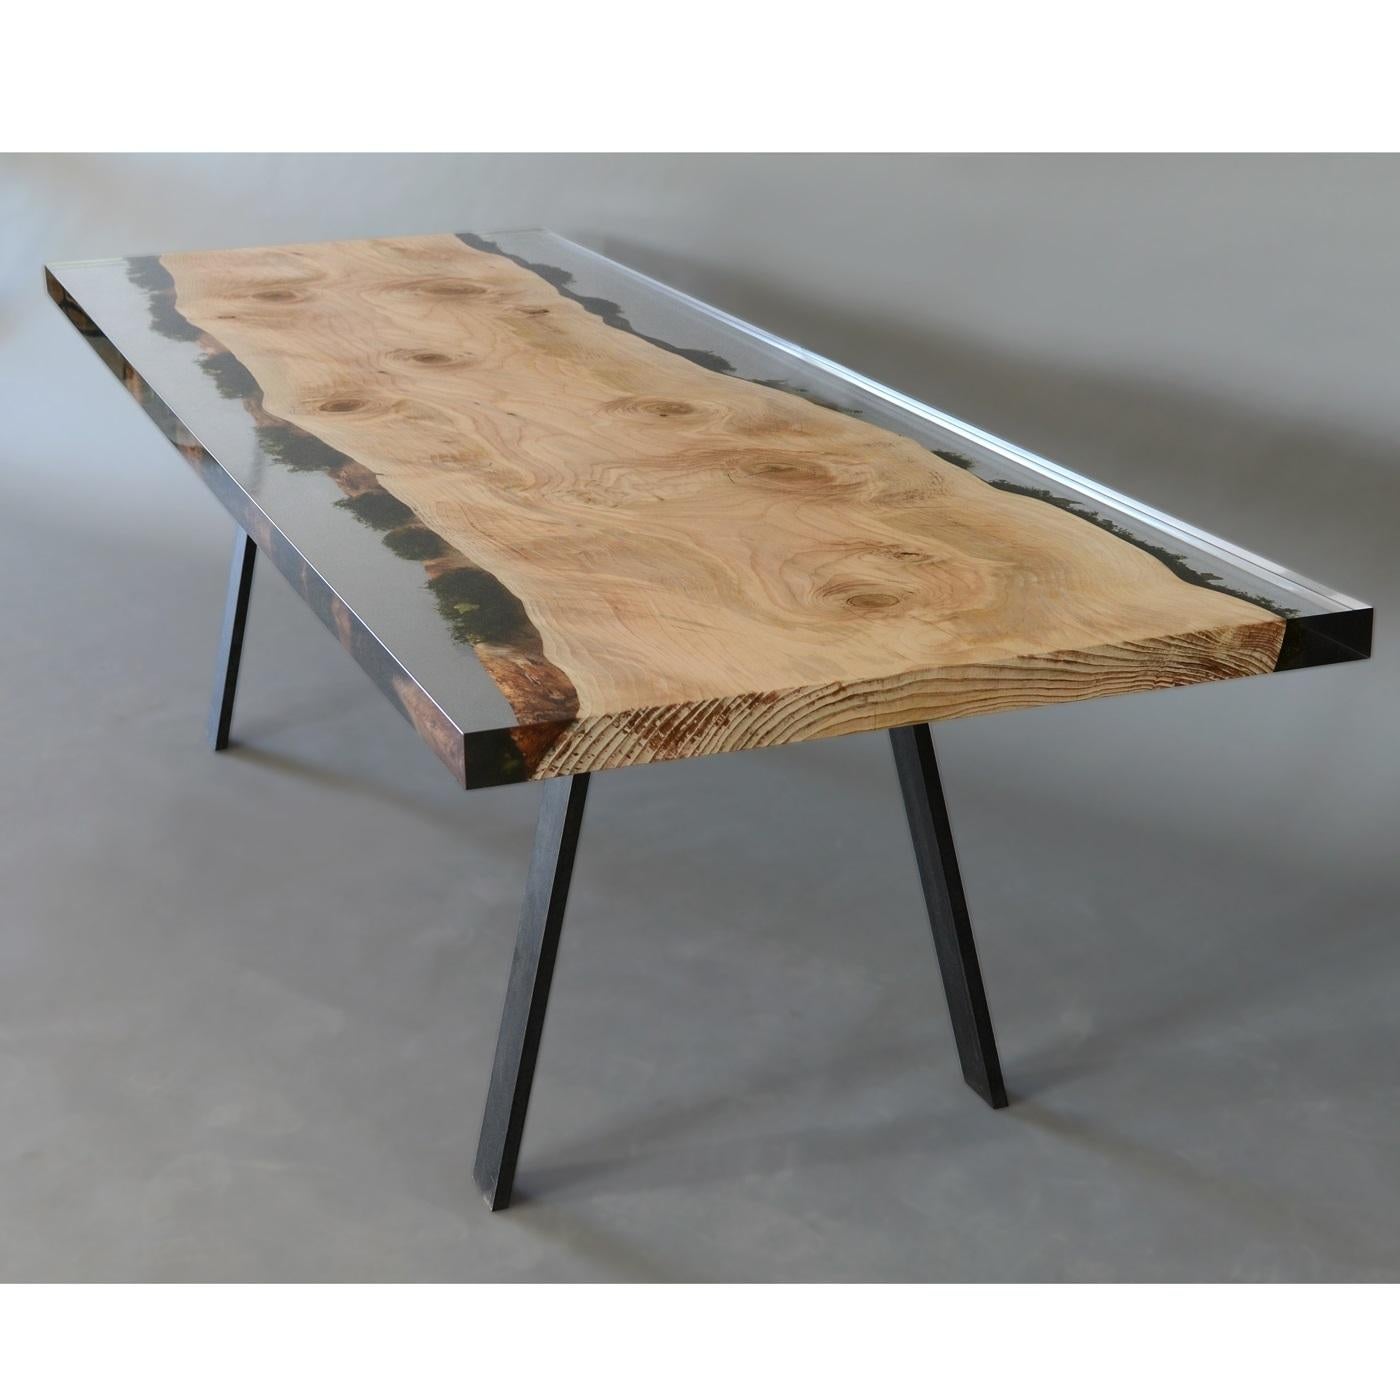 This unique table features a top crafted from a plank of wood found in the Dolomite forests, with its natural edges preserved along with the flora growing on it. This single plank of wood and its mossy edges are preserved by a special transparent